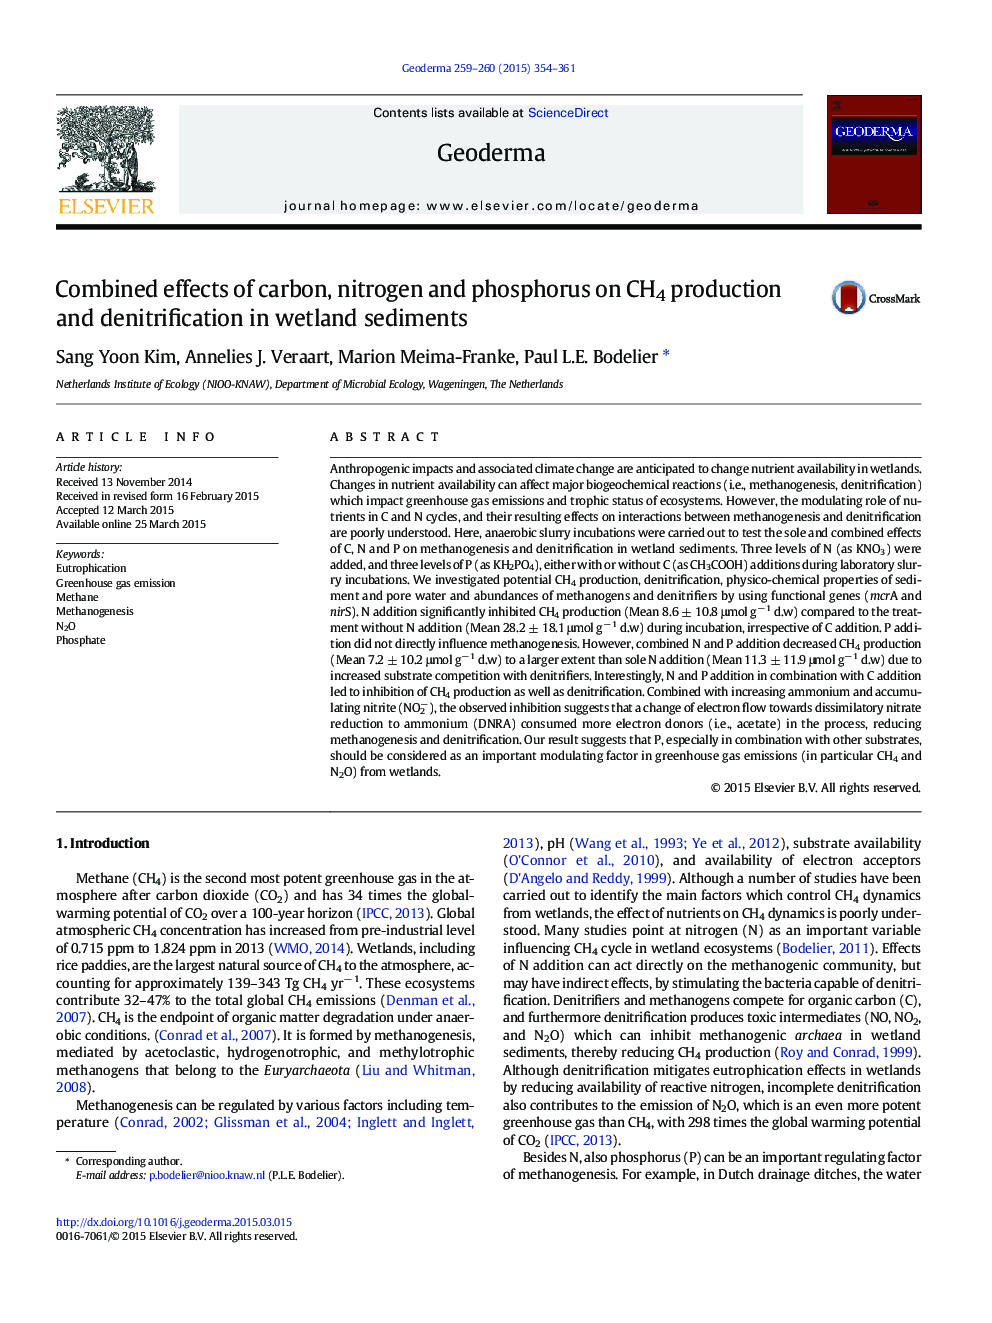 Combined effects of carbon, nitrogen and phosphorus on CH4 production and denitrification in wetland sediments